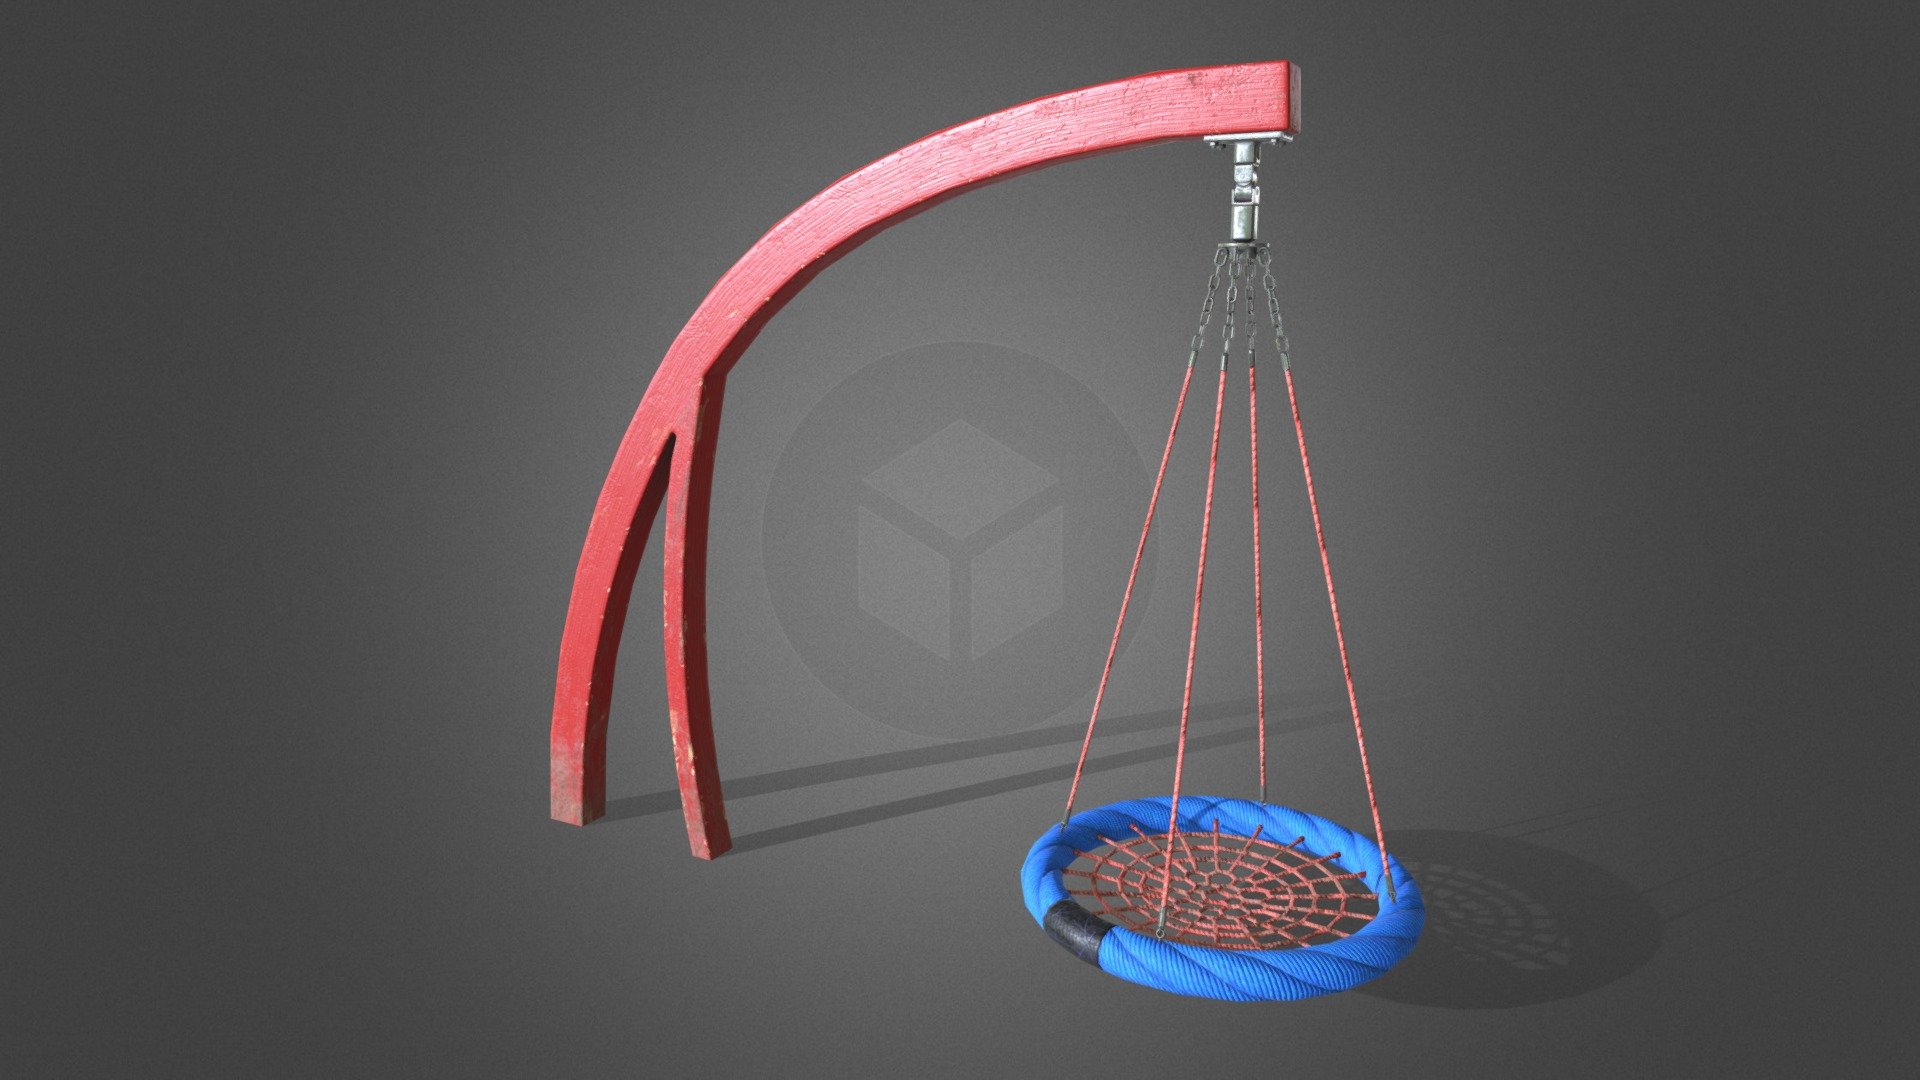 Low-poly, Game-ready model of a Playground Cantilever Swing.

TEXTURES

High resolution PBR Metal/Roughness textures are provided in the additional files.

Texture Size: 4096x2048 pixels
Texture format: PNG 8 bit (uncompressed)




Base Color (Diffuse)

Metallic

Roughness

Height

Normal 

Ambient Occlusion

This asset is part of our Playground collection which contains many more models to re-create the perfect playground for your projects!

Check out all our Playground models here - Playground Cantilever Swing - Buy Royalty Free 3D model by Ringtail Studios (@ringtail) 3d model